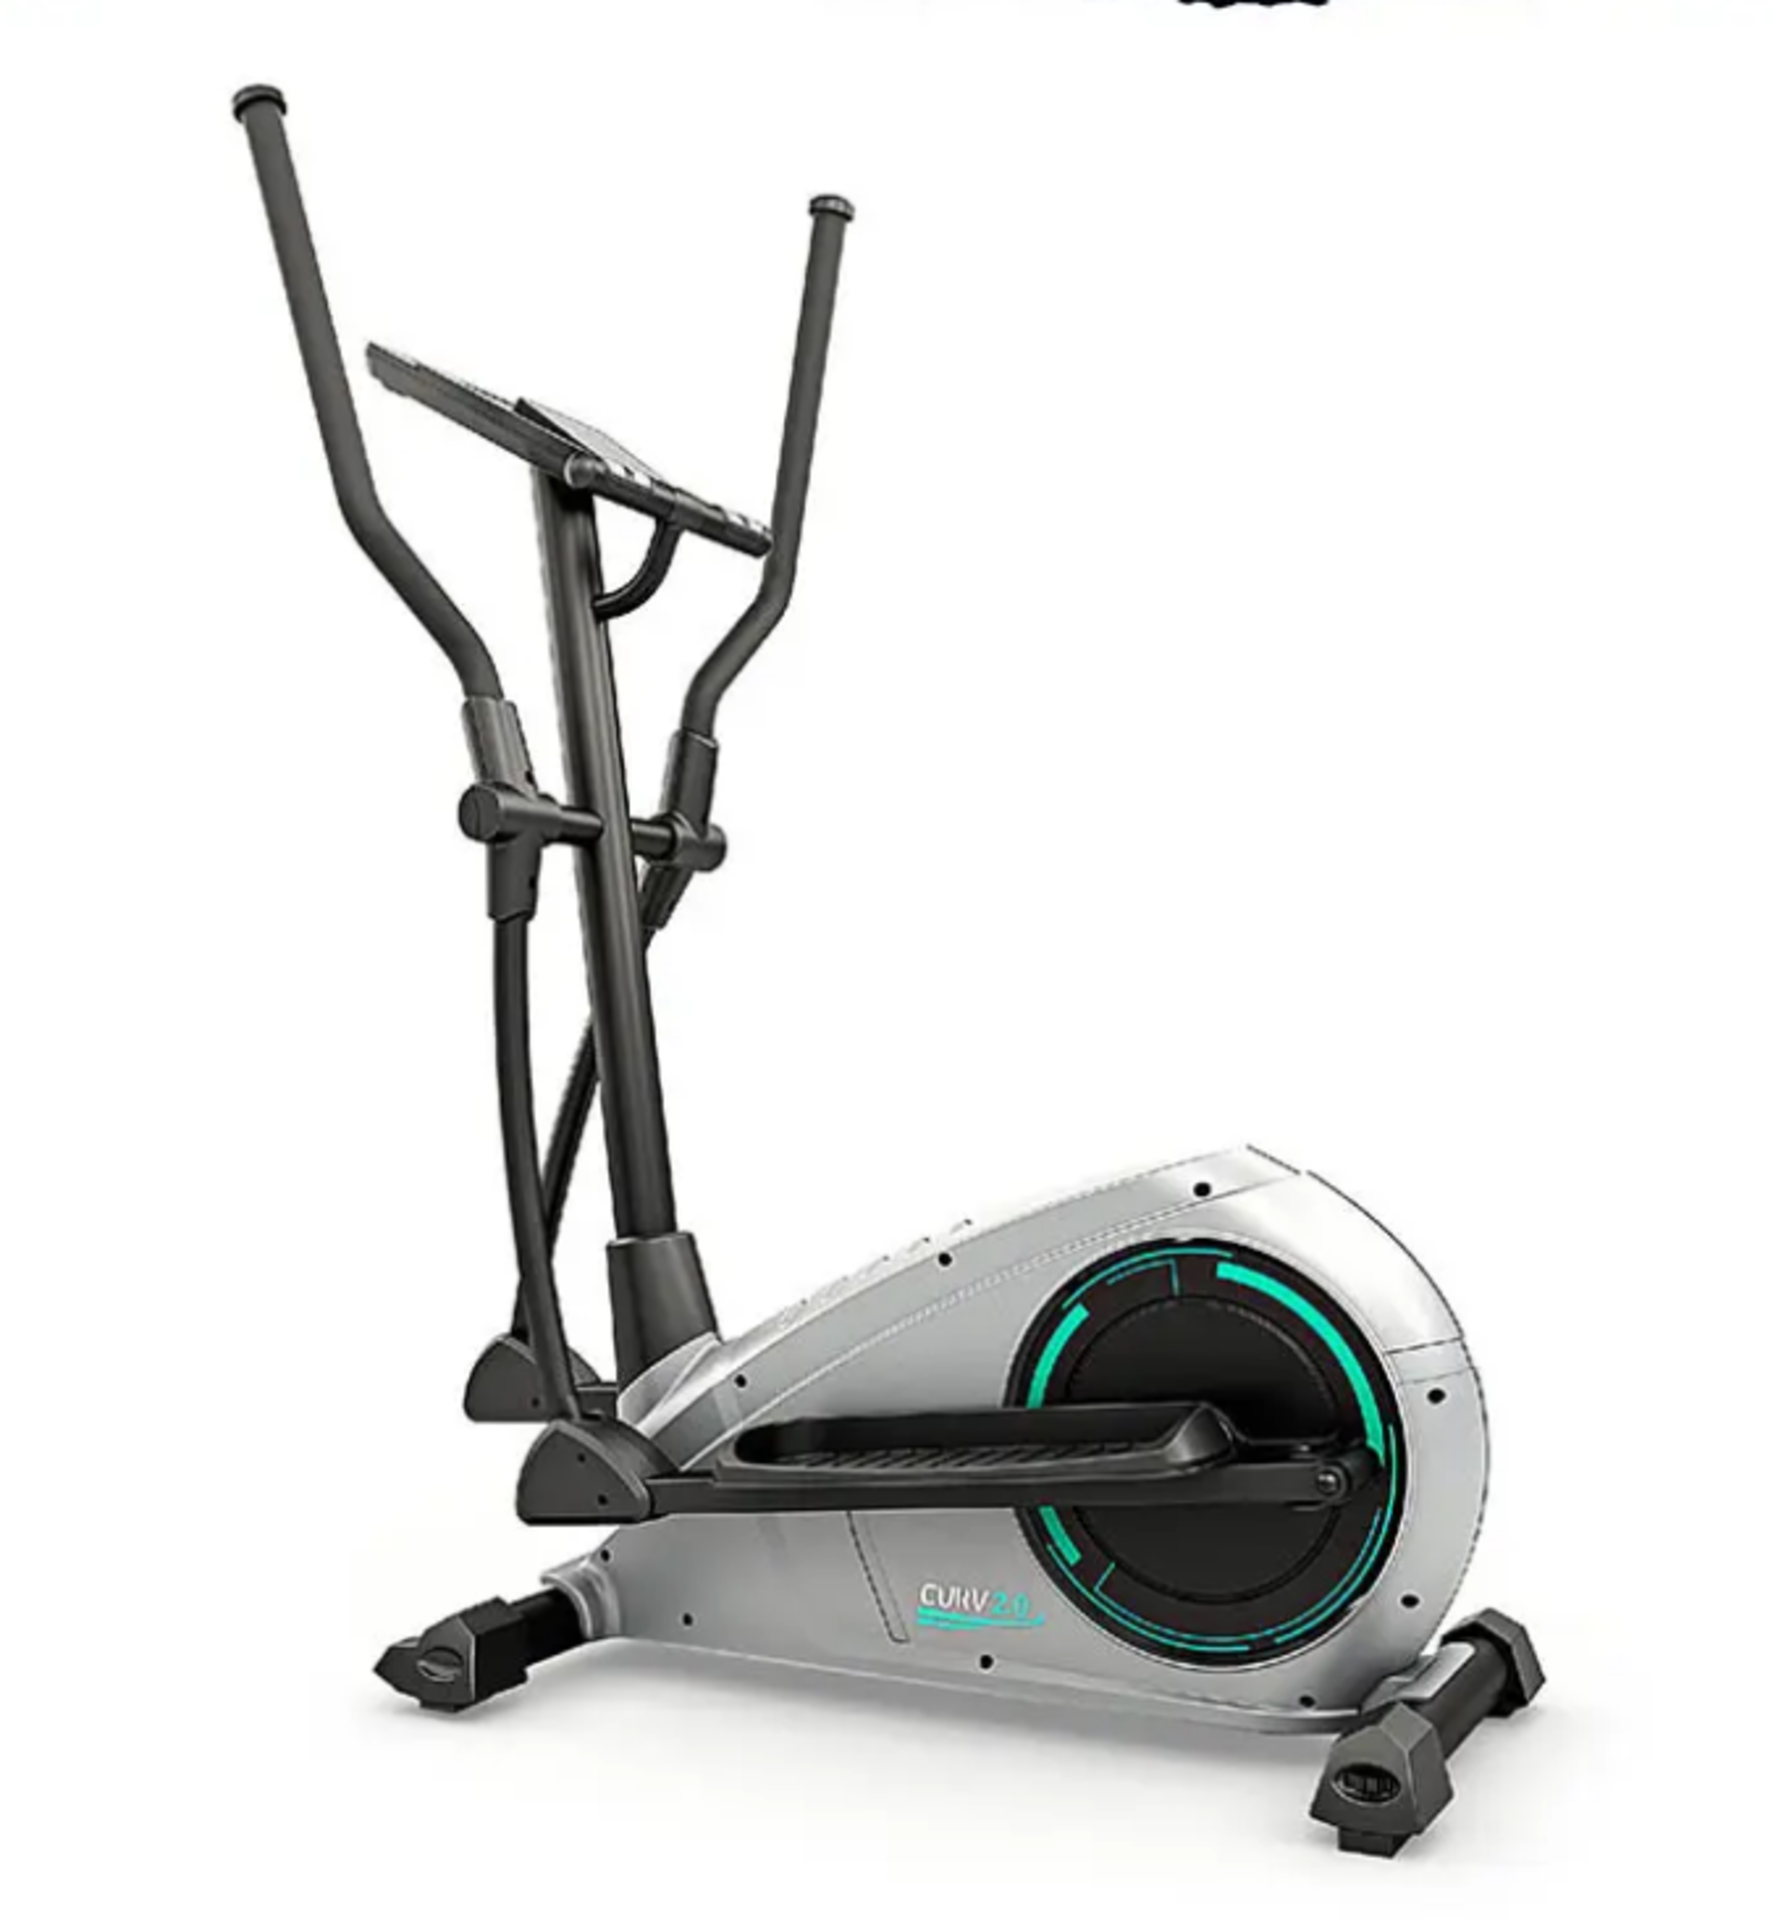 Bluefin Fitness Curv 2.0 Elliptical Air-Walker Cross Trainer and Step Machine RRP £599.00Our 2.0